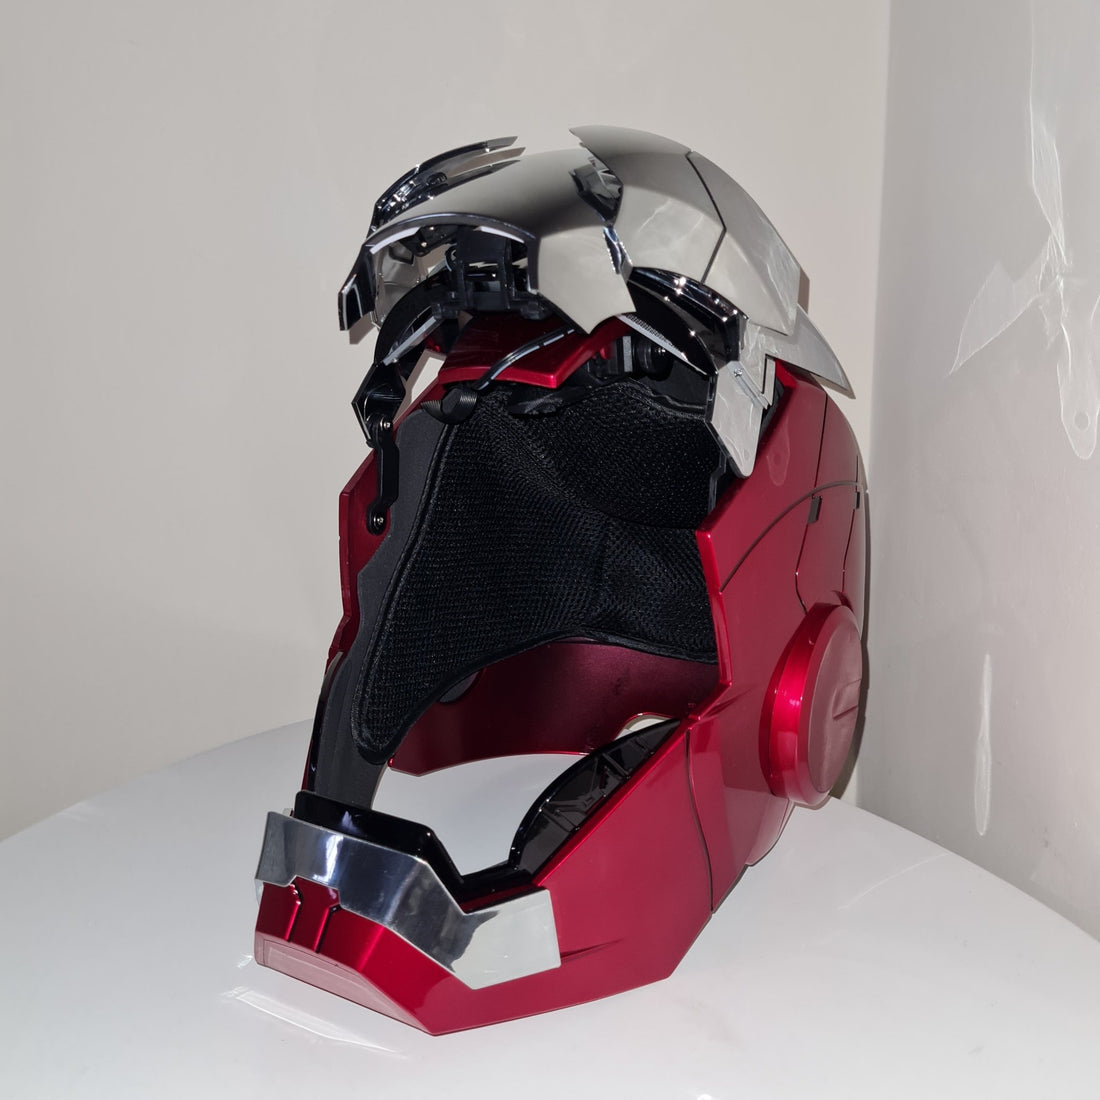 Mastering Voice Controls with the Iron Man MK5 Helmet: A Step-by-Step Guide